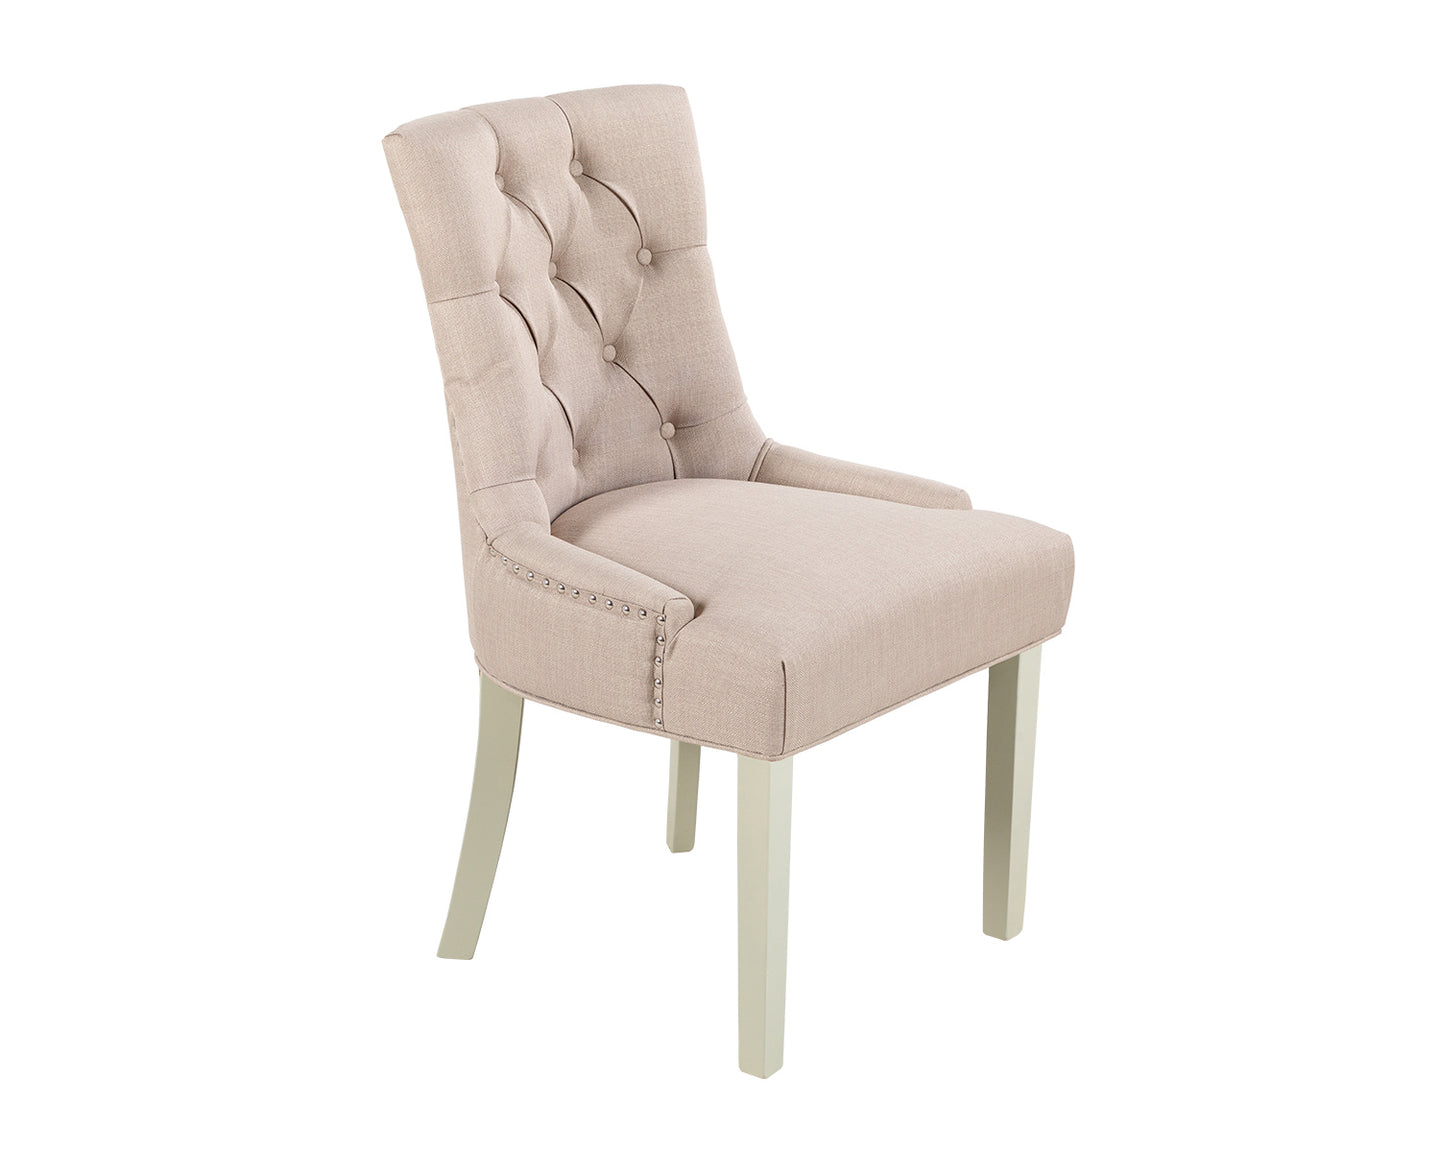 Verona Dining Chair in Cream Linen with Chrome Knocker and Grey Legs